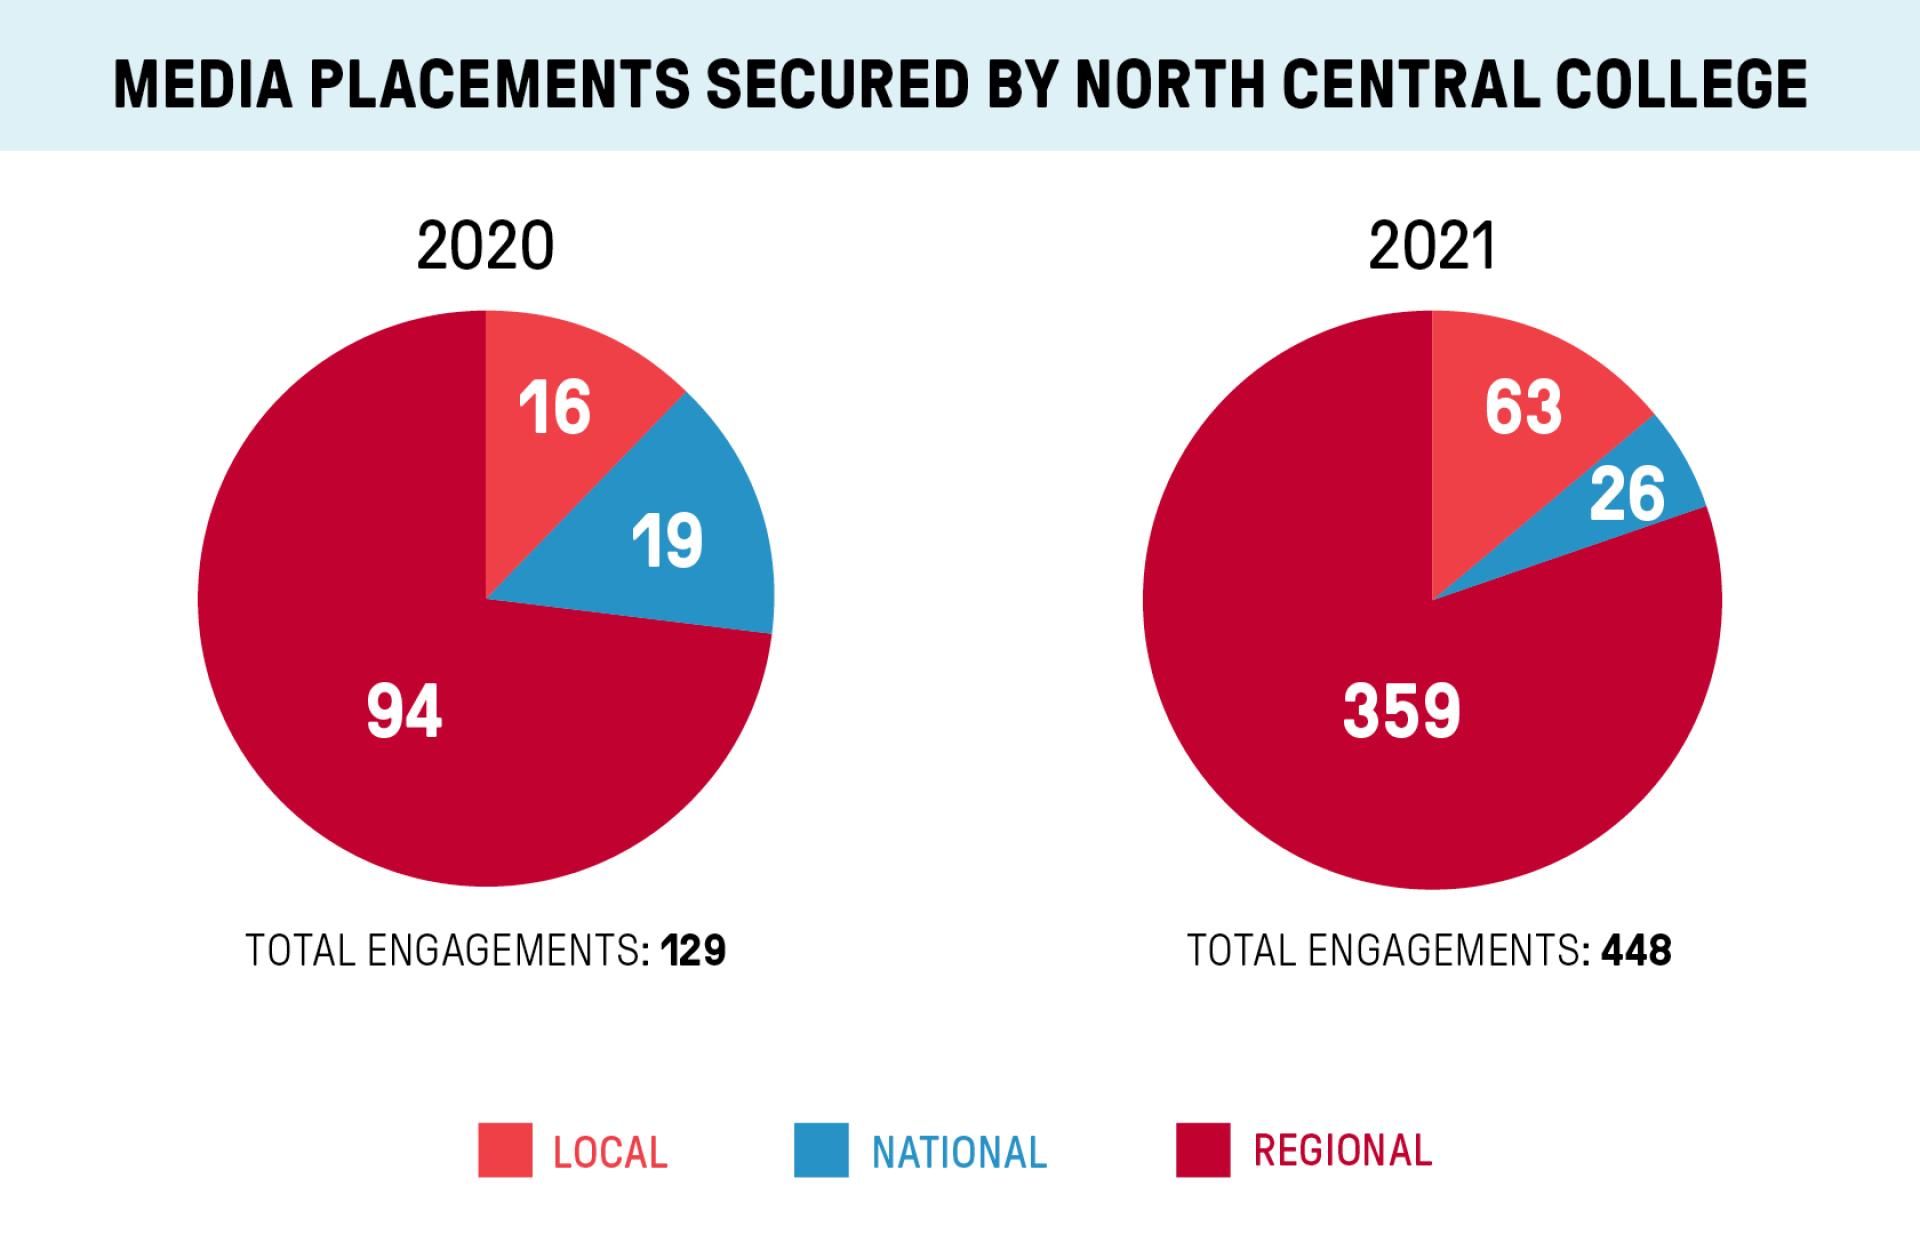 A chart depicting the rise in media engagement for North Central College from 2020 to 2021.